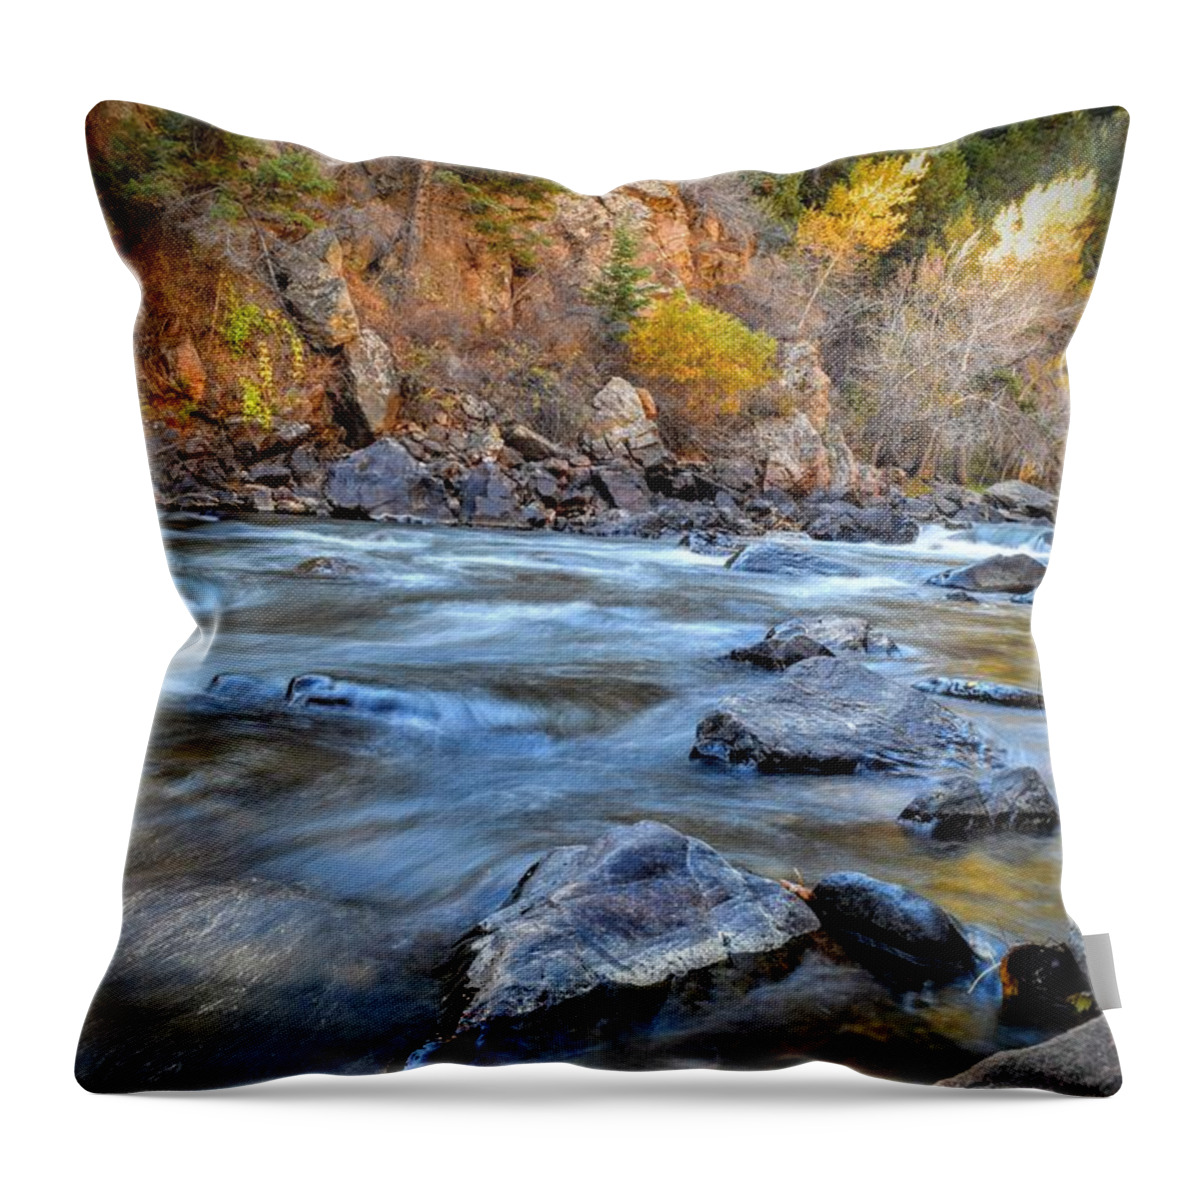 Creek Throw Pillow featuring the photograph Creek Morning by Michael Brungardt